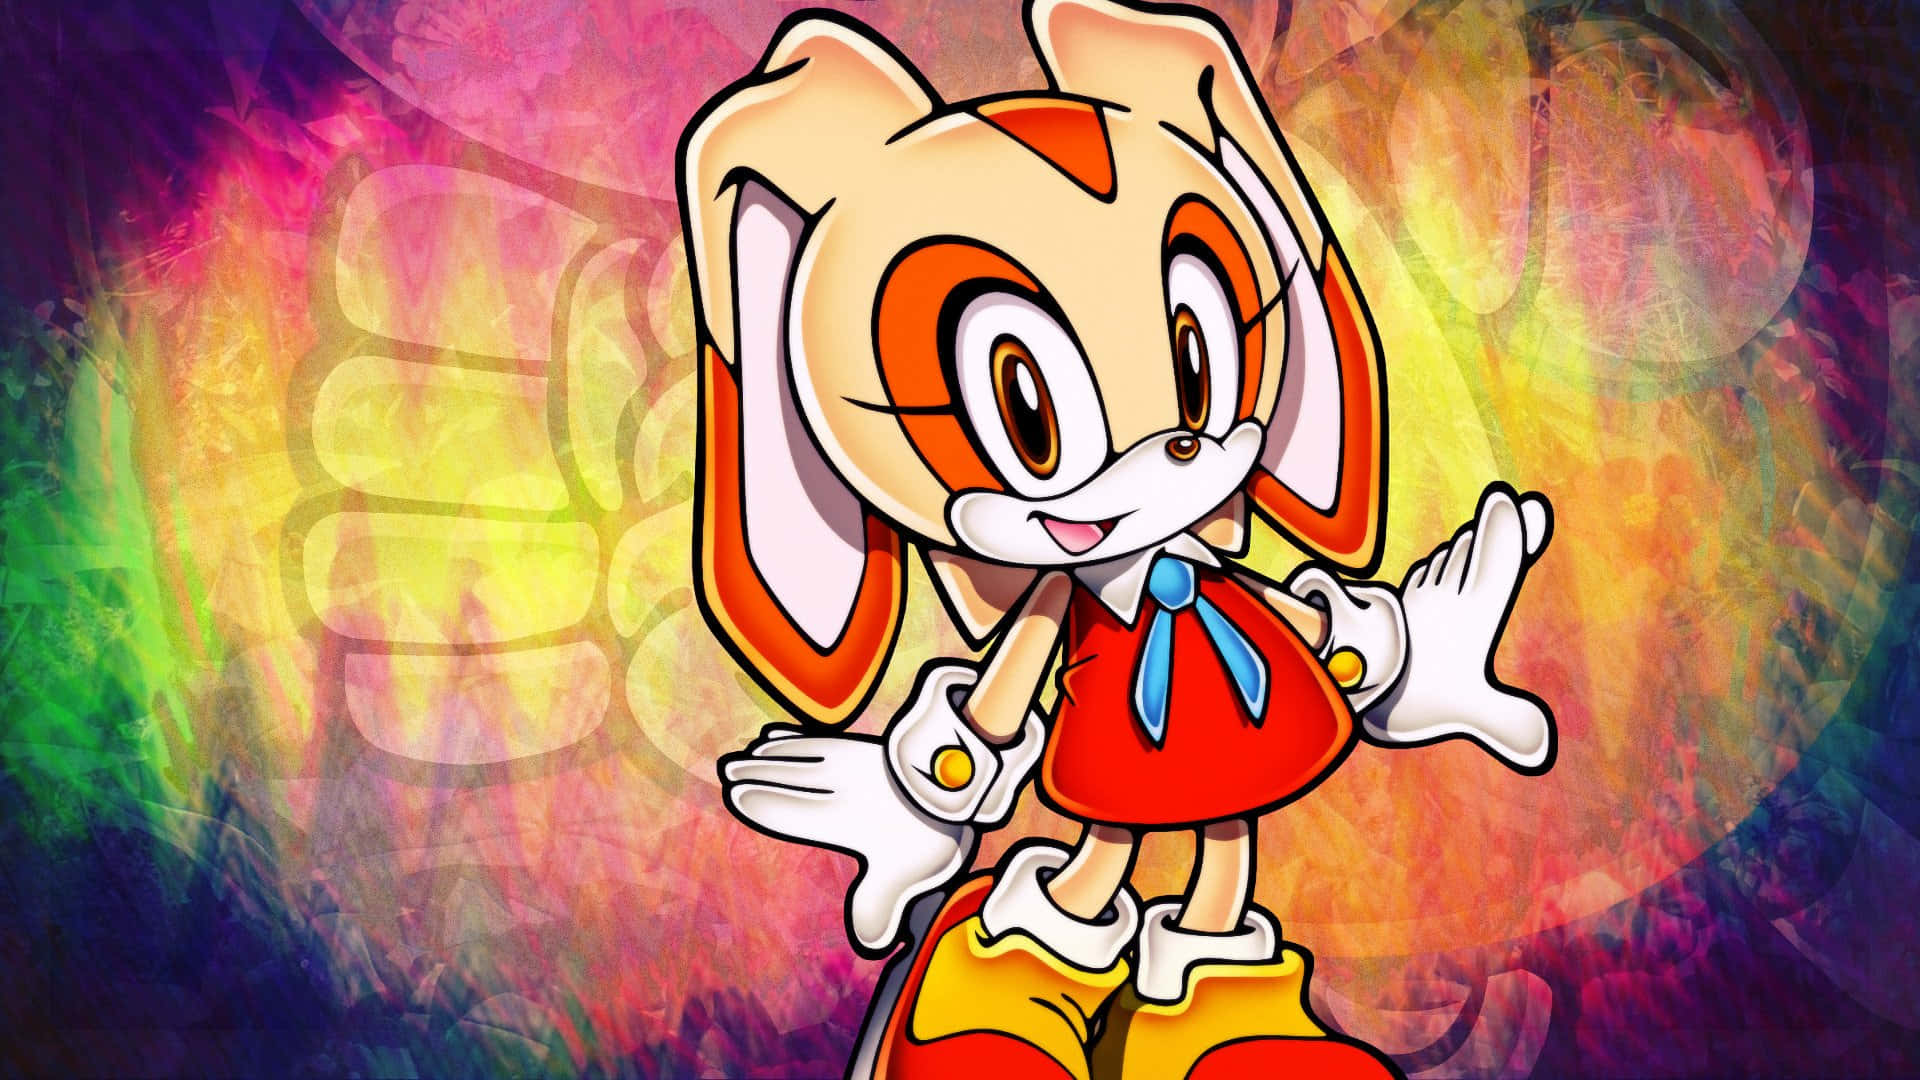 Cream The Rabbit posing with Cheese the Chao Wallpaper